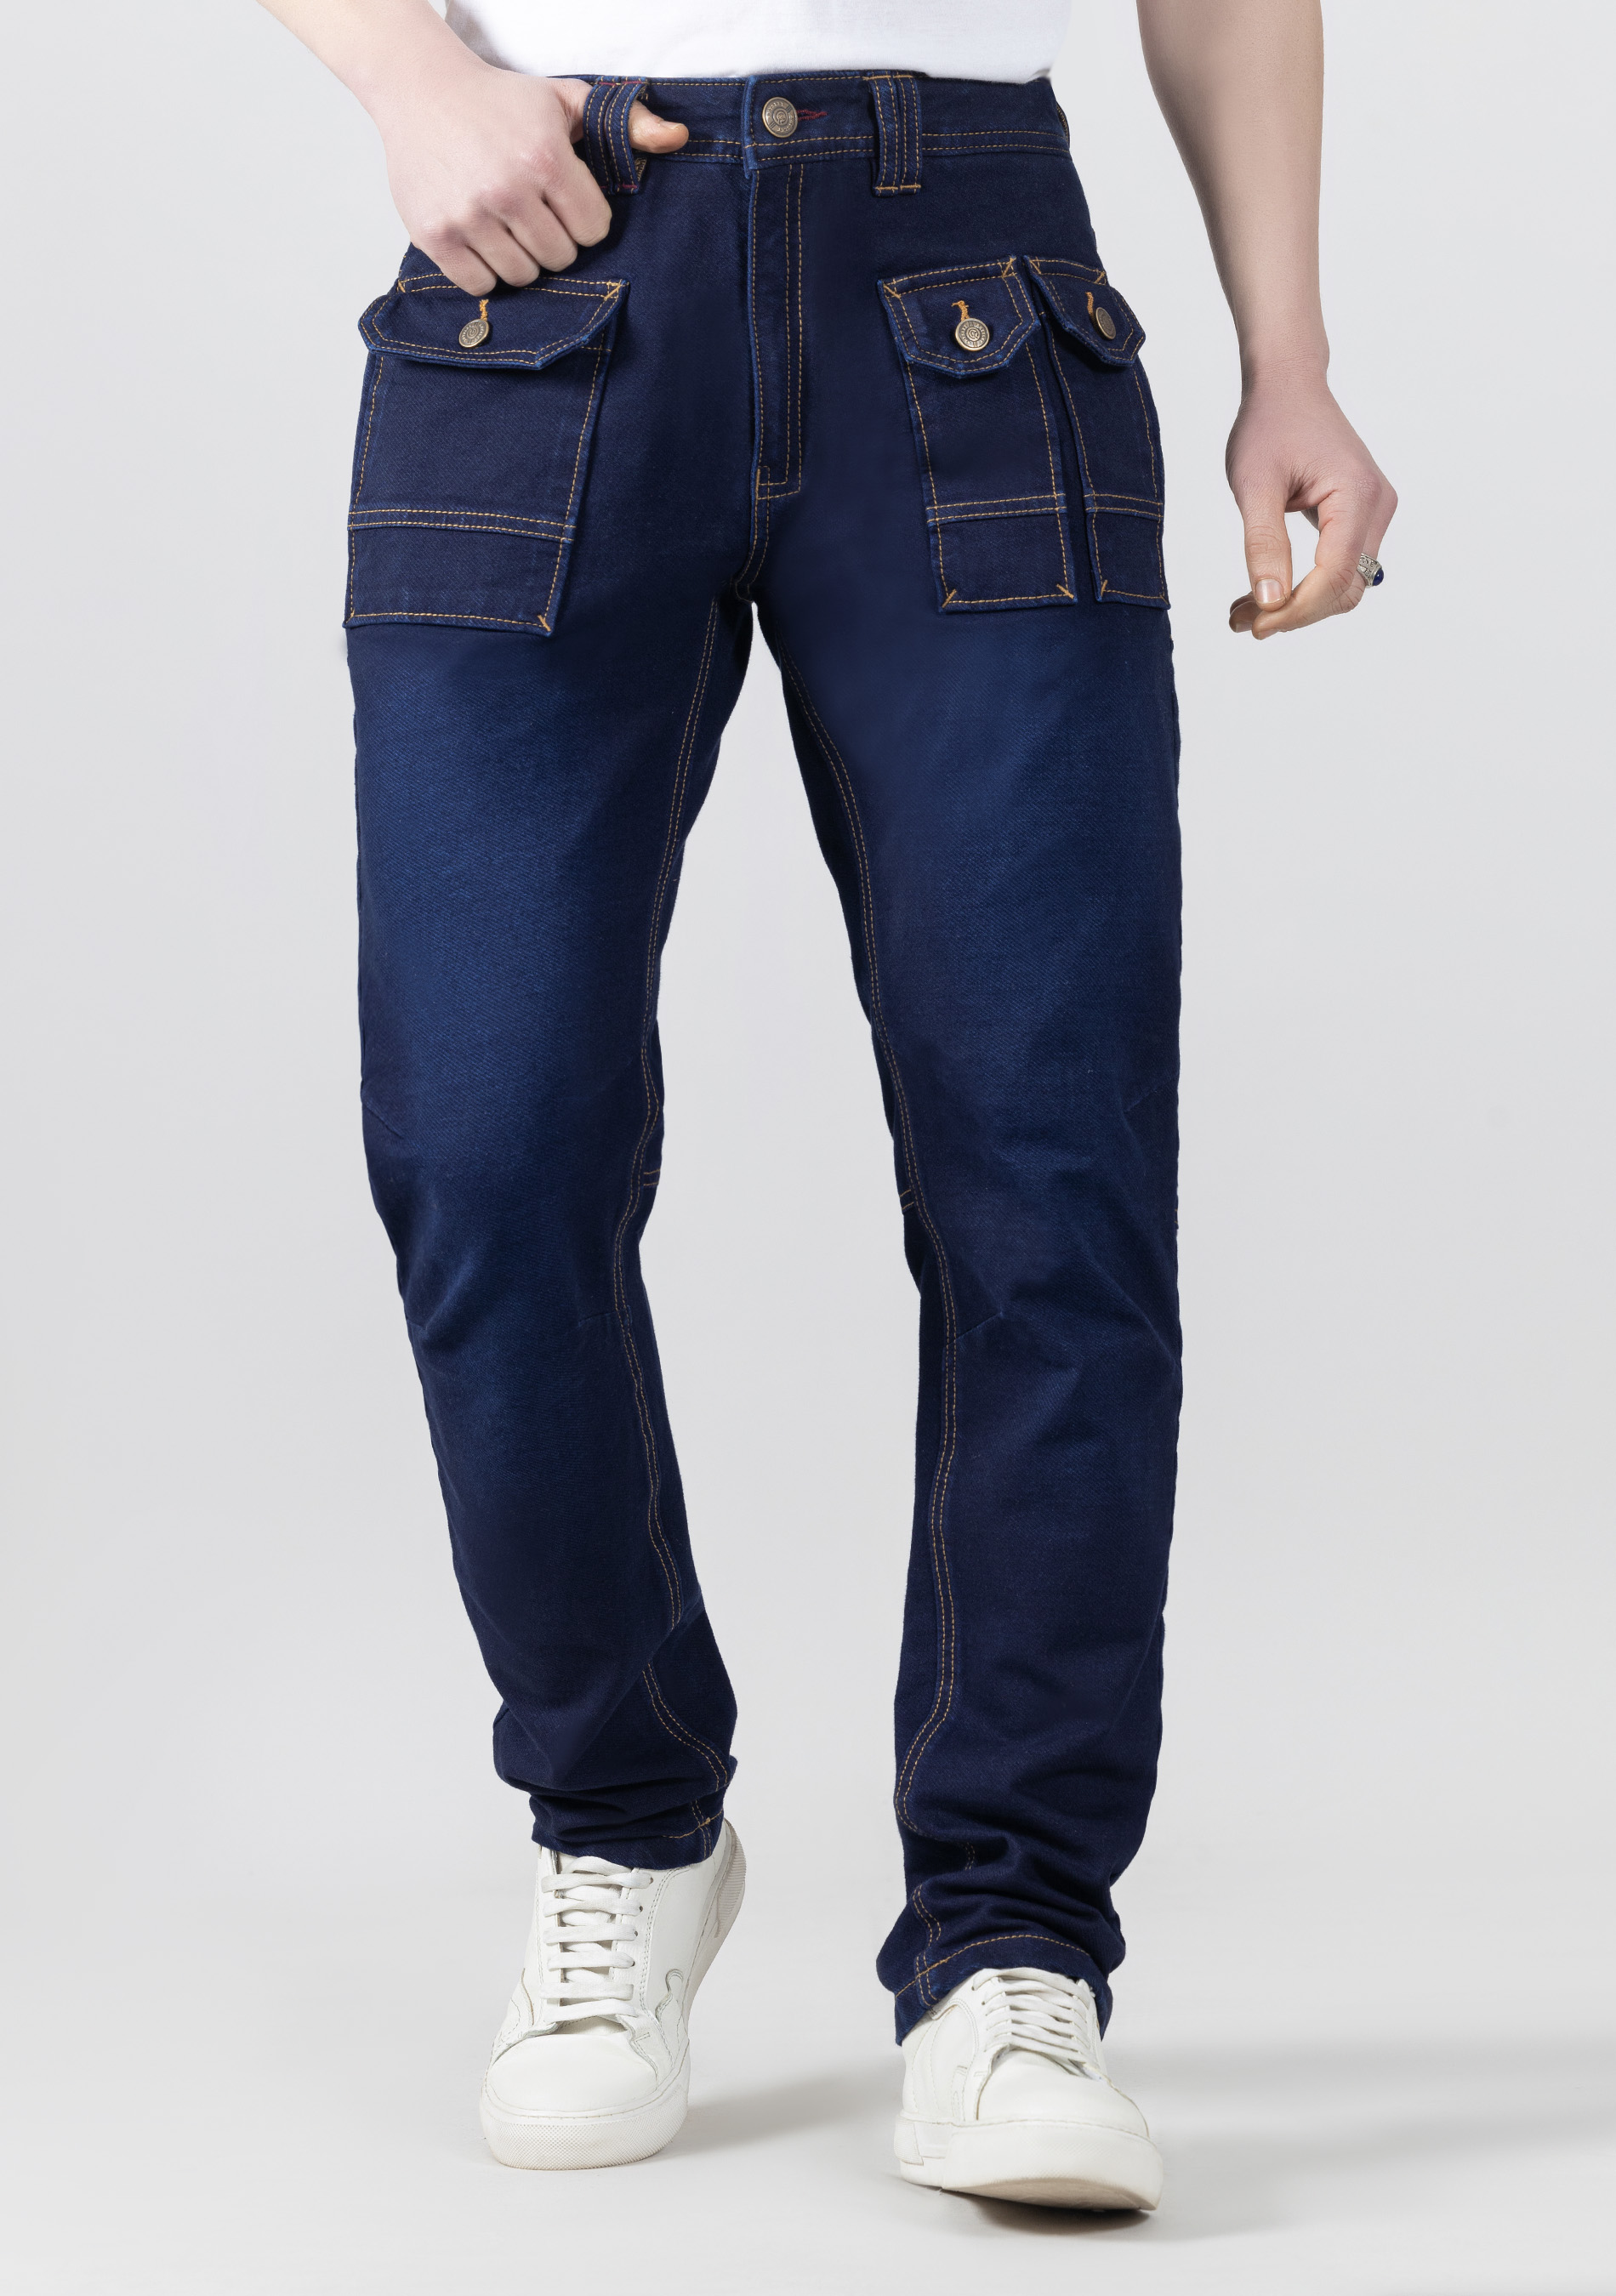 Buy Black Narrow Fit Denim Deluxe Stretch Jeans Online at Muftijeans